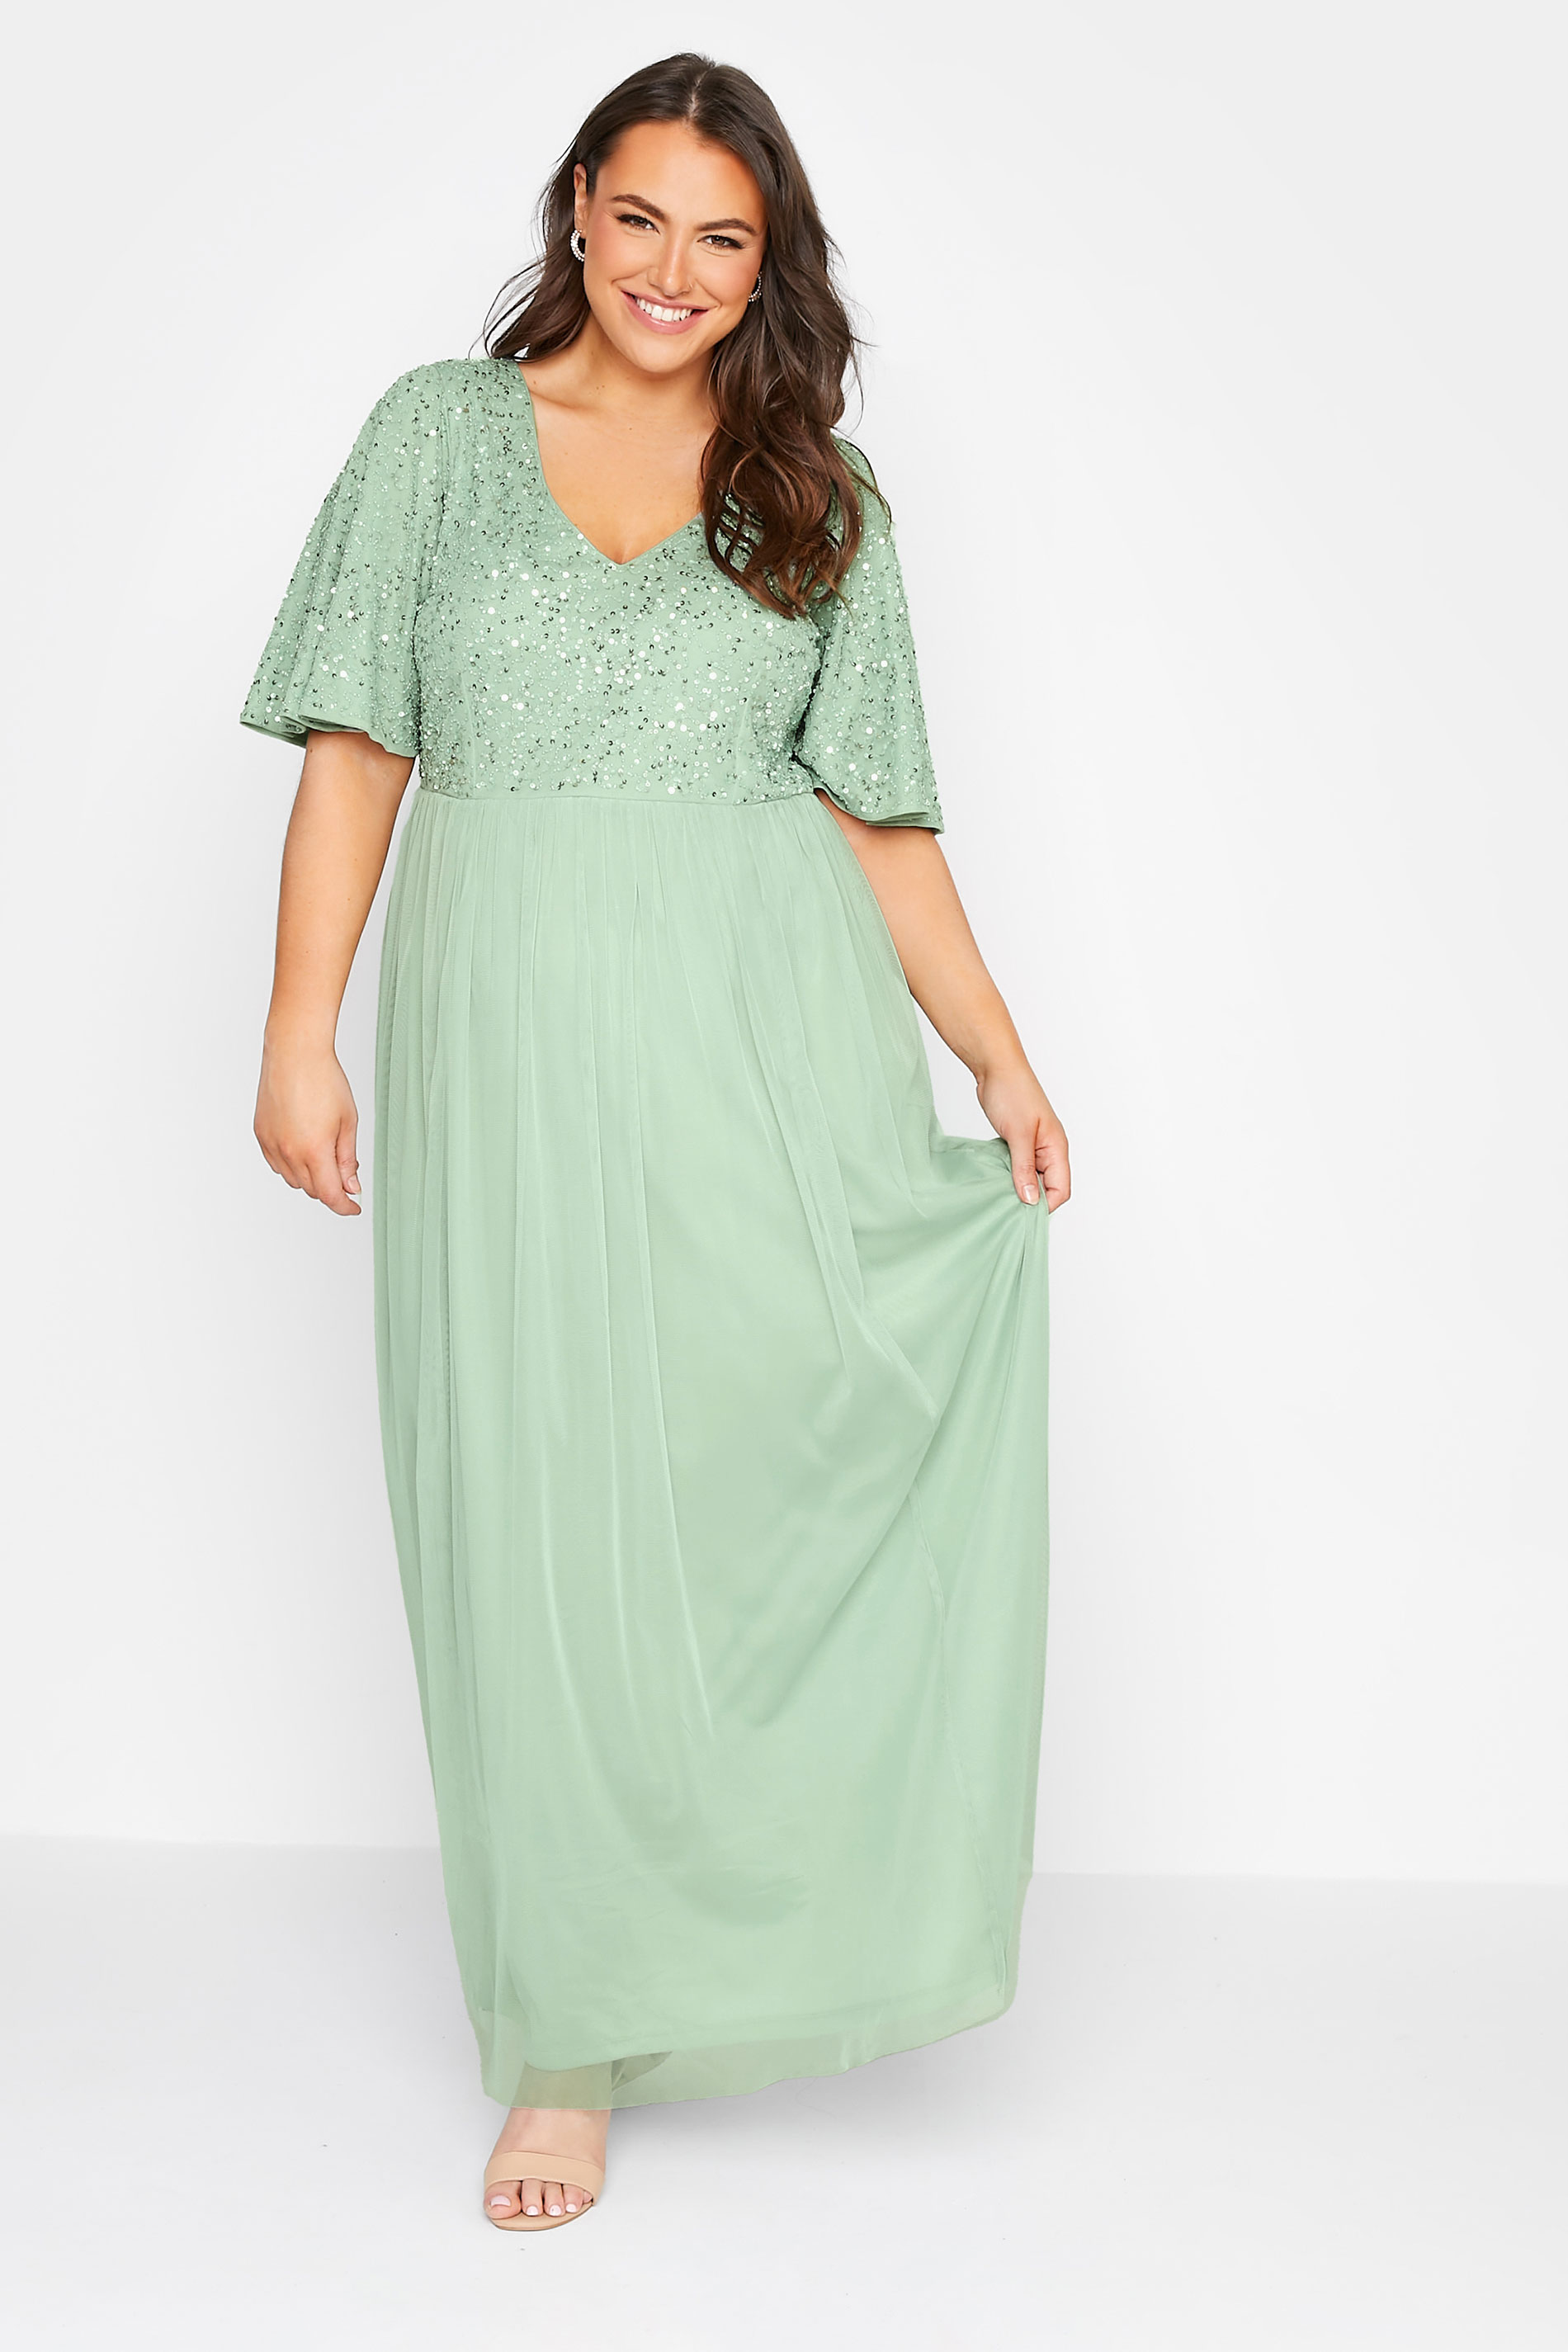 LUXE Plus Size Sage Green Sequin Hand Embellished Maxi Dress | Yours Clothing 3